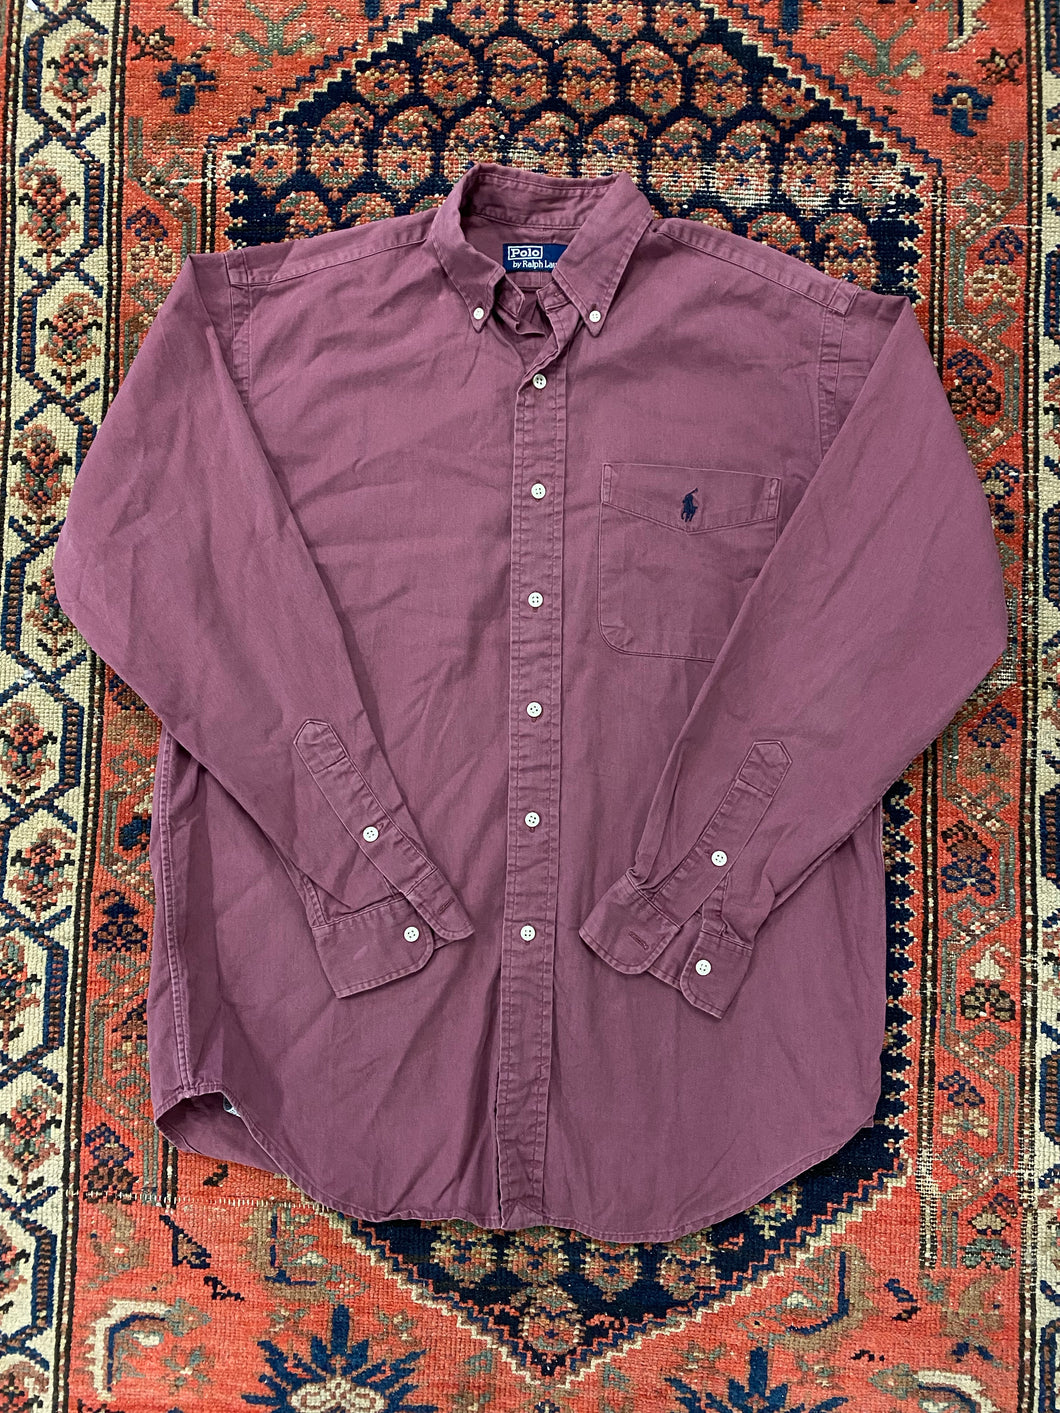 Vintage Polo Button Up Shirt - S